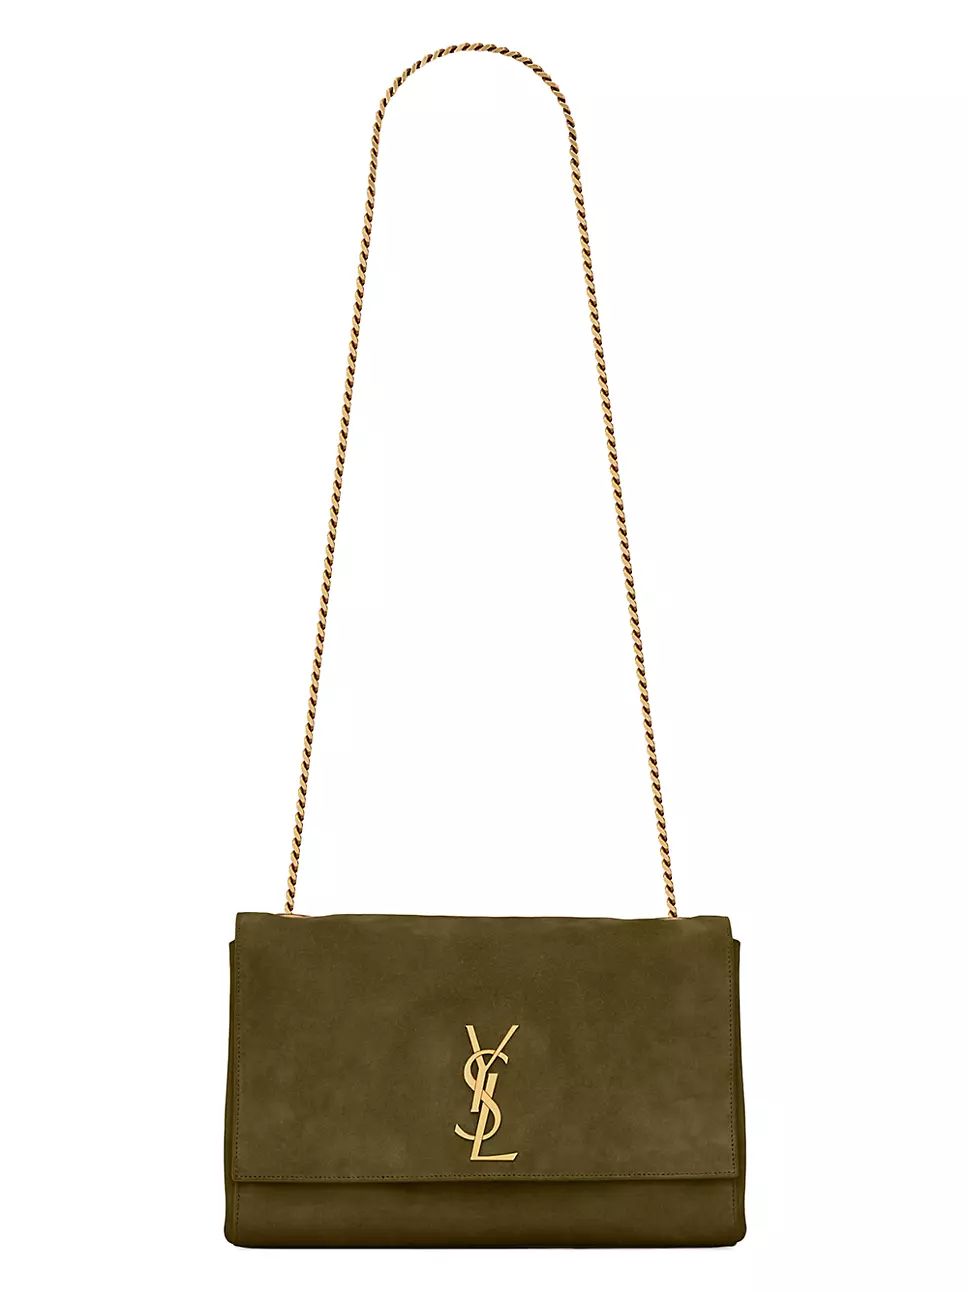 Saint Laurent Kate Medium Supple Reversible Chain Bag in Shiny Leather and Suede | Saks Fifth Avenue